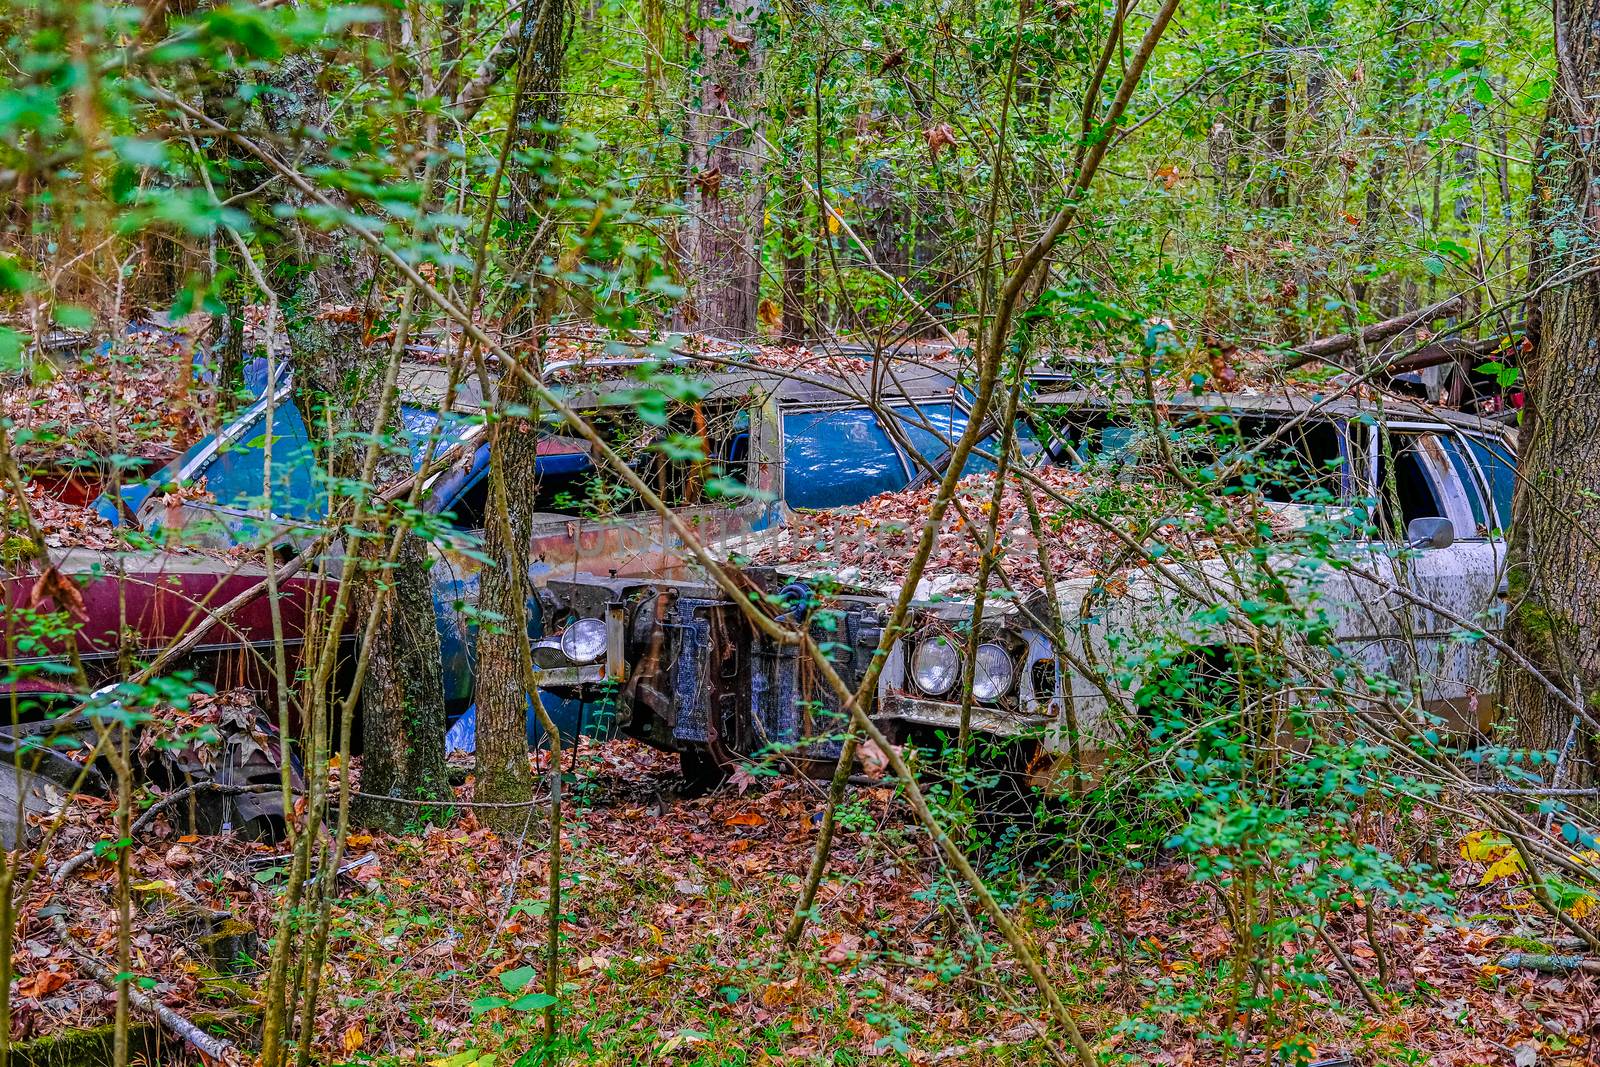 Wrecked Cars in the Weeds of a Junkyard